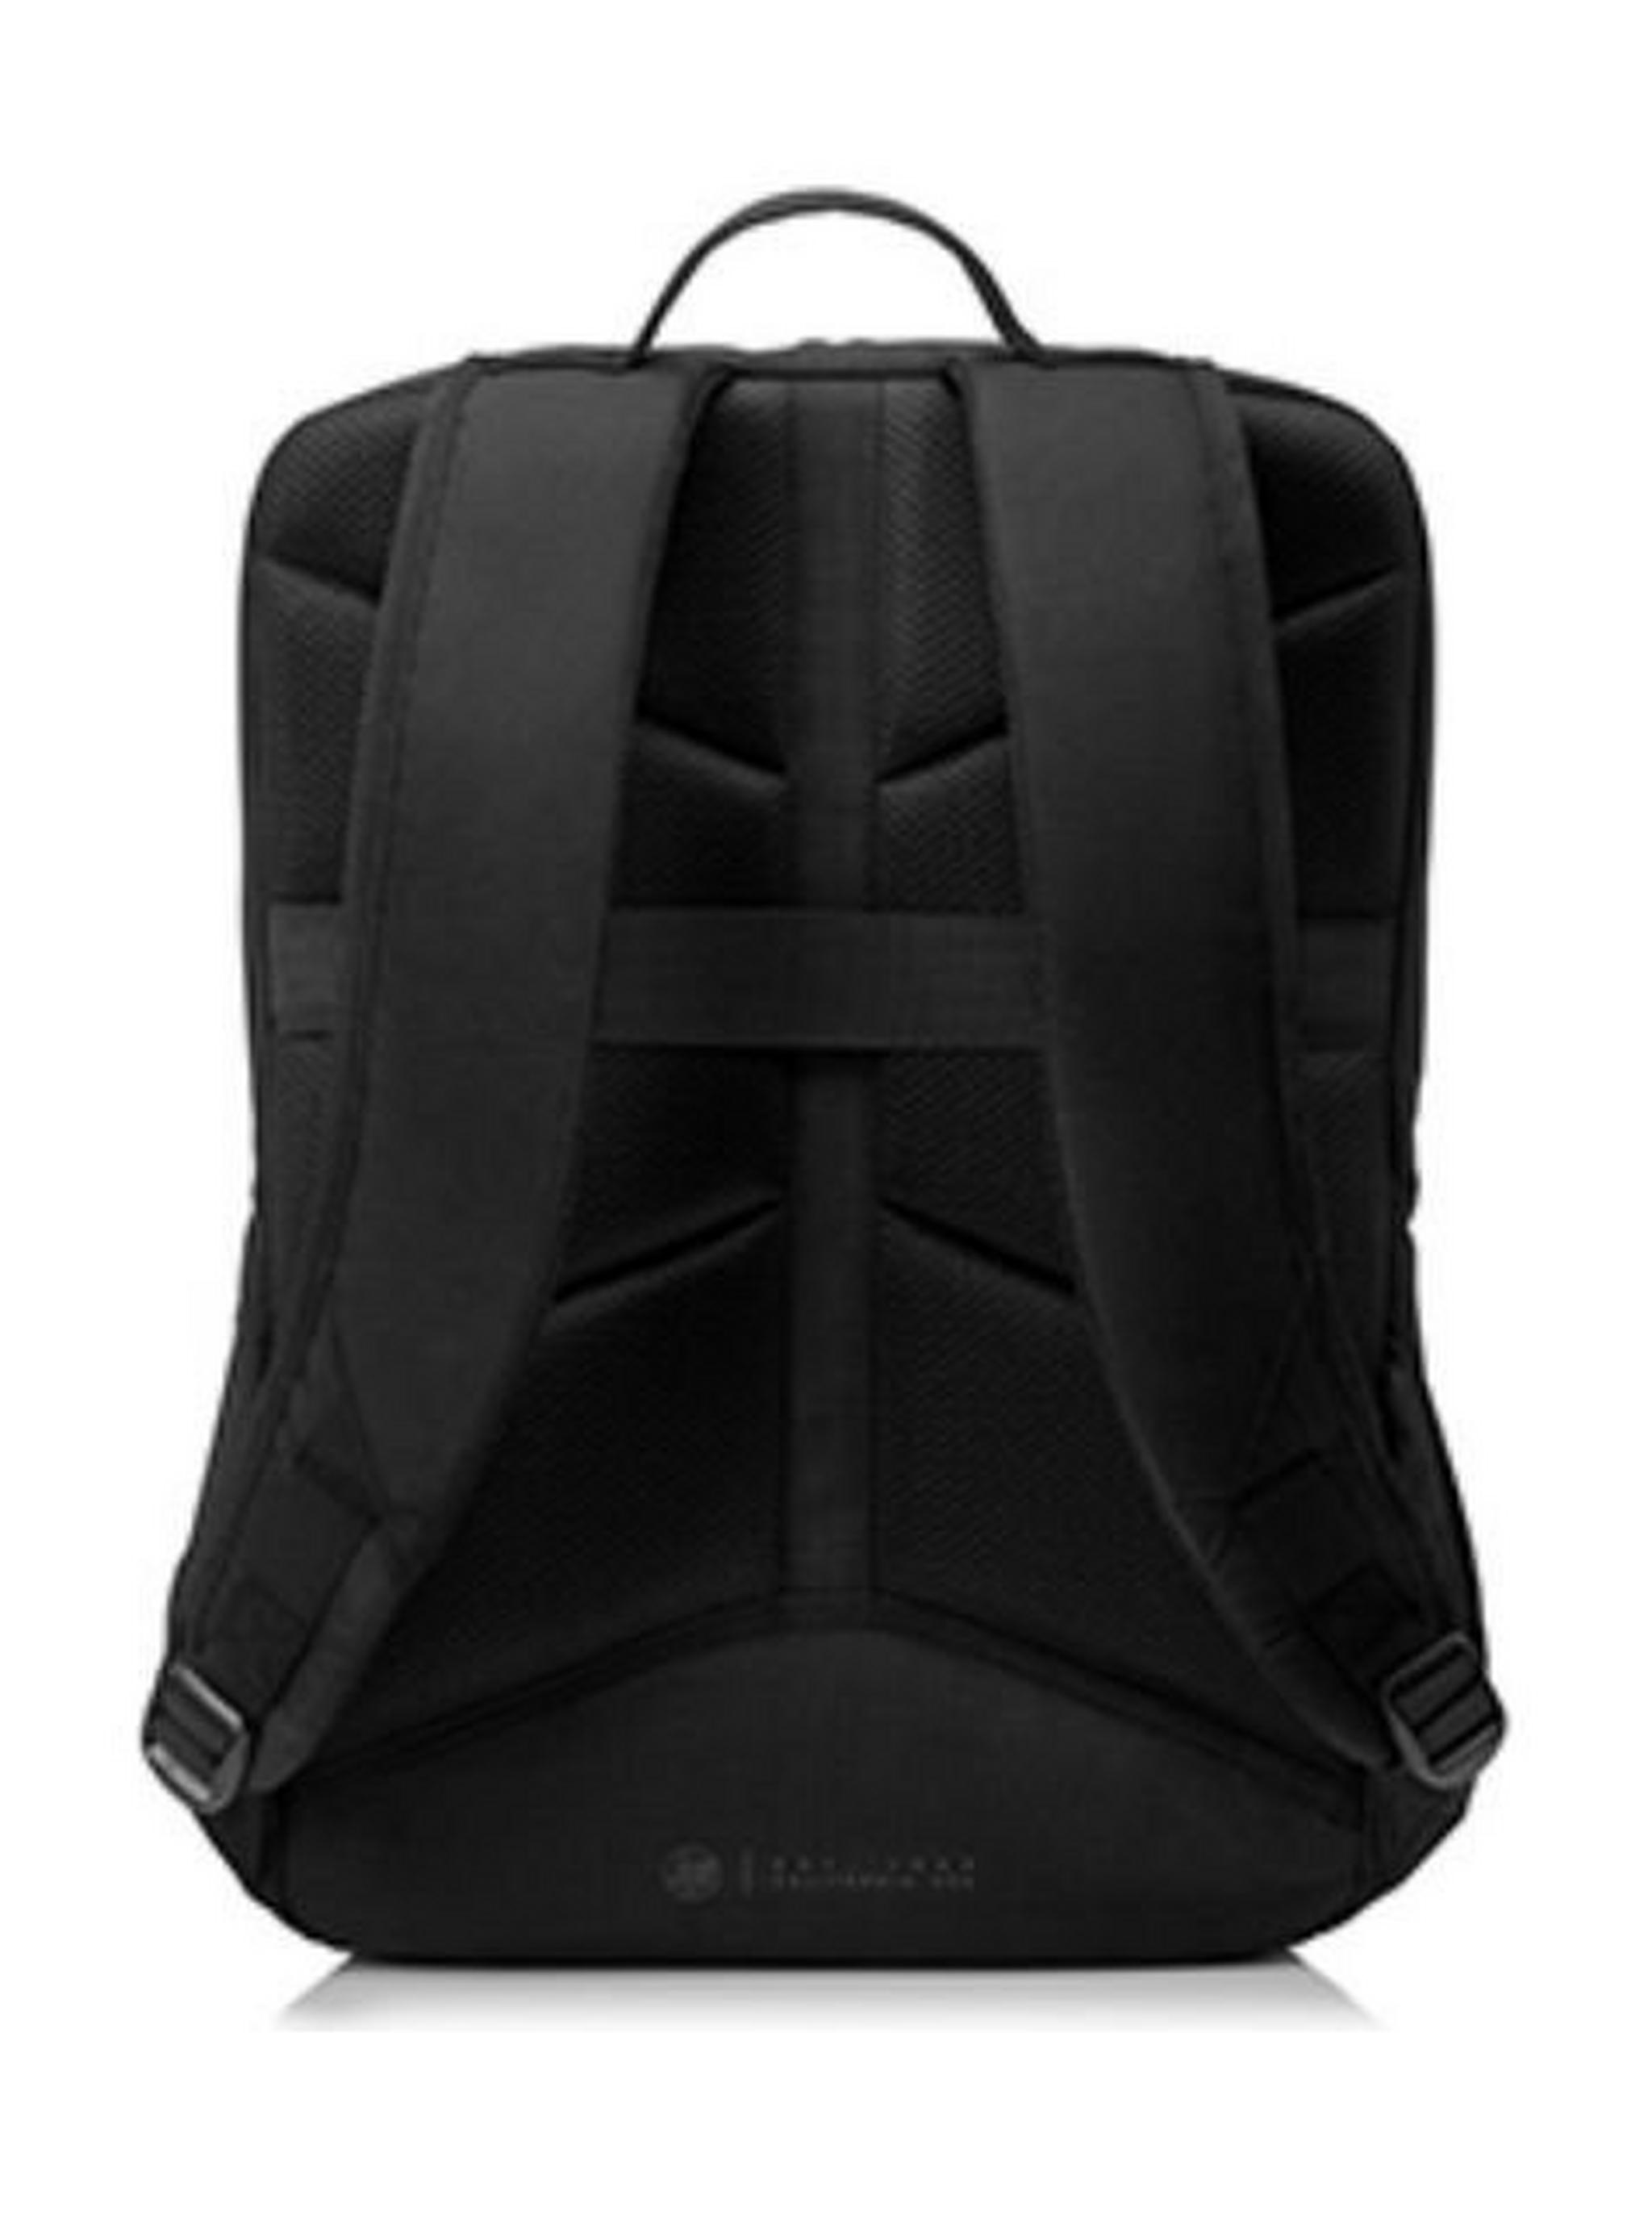 HP Pavilion Gaming Backpack 500 for up to 17.3-inch Laptop